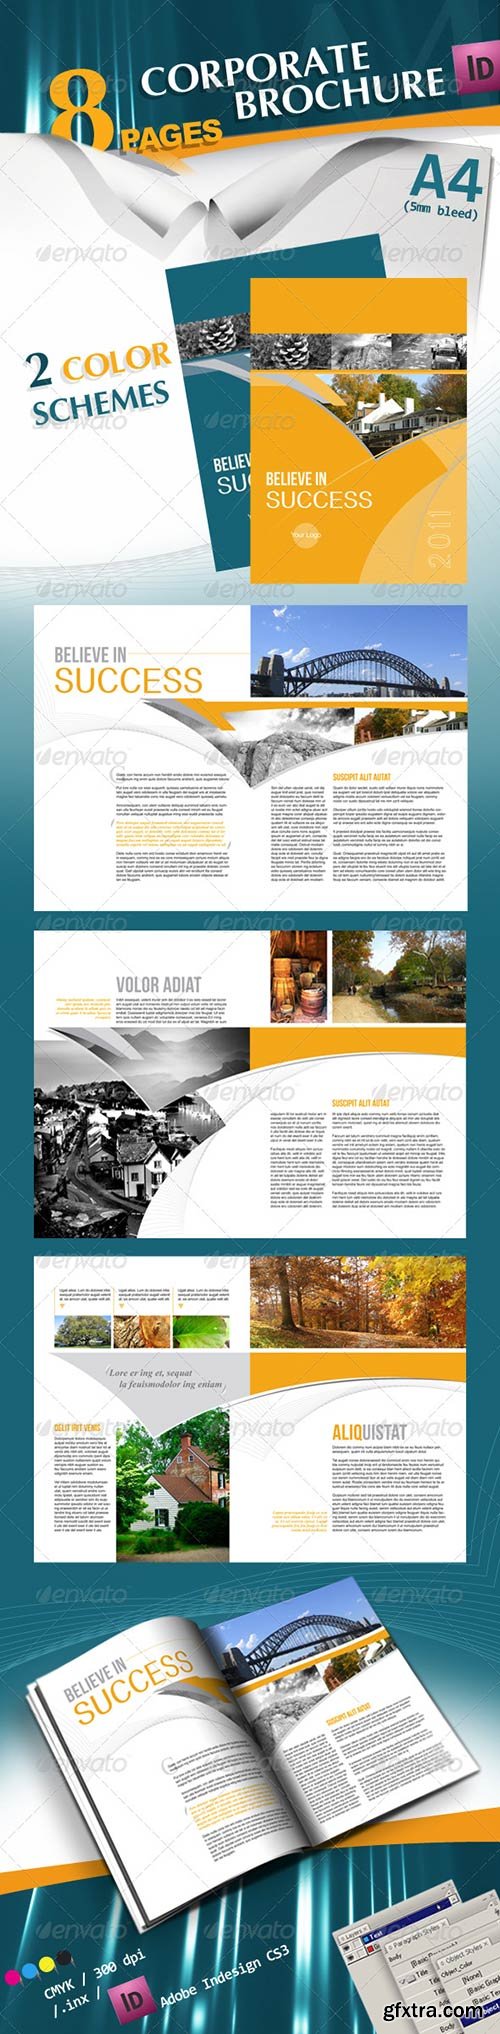 GraphicRiver - Corporate A4 Brochure in 2 Schemes of Color